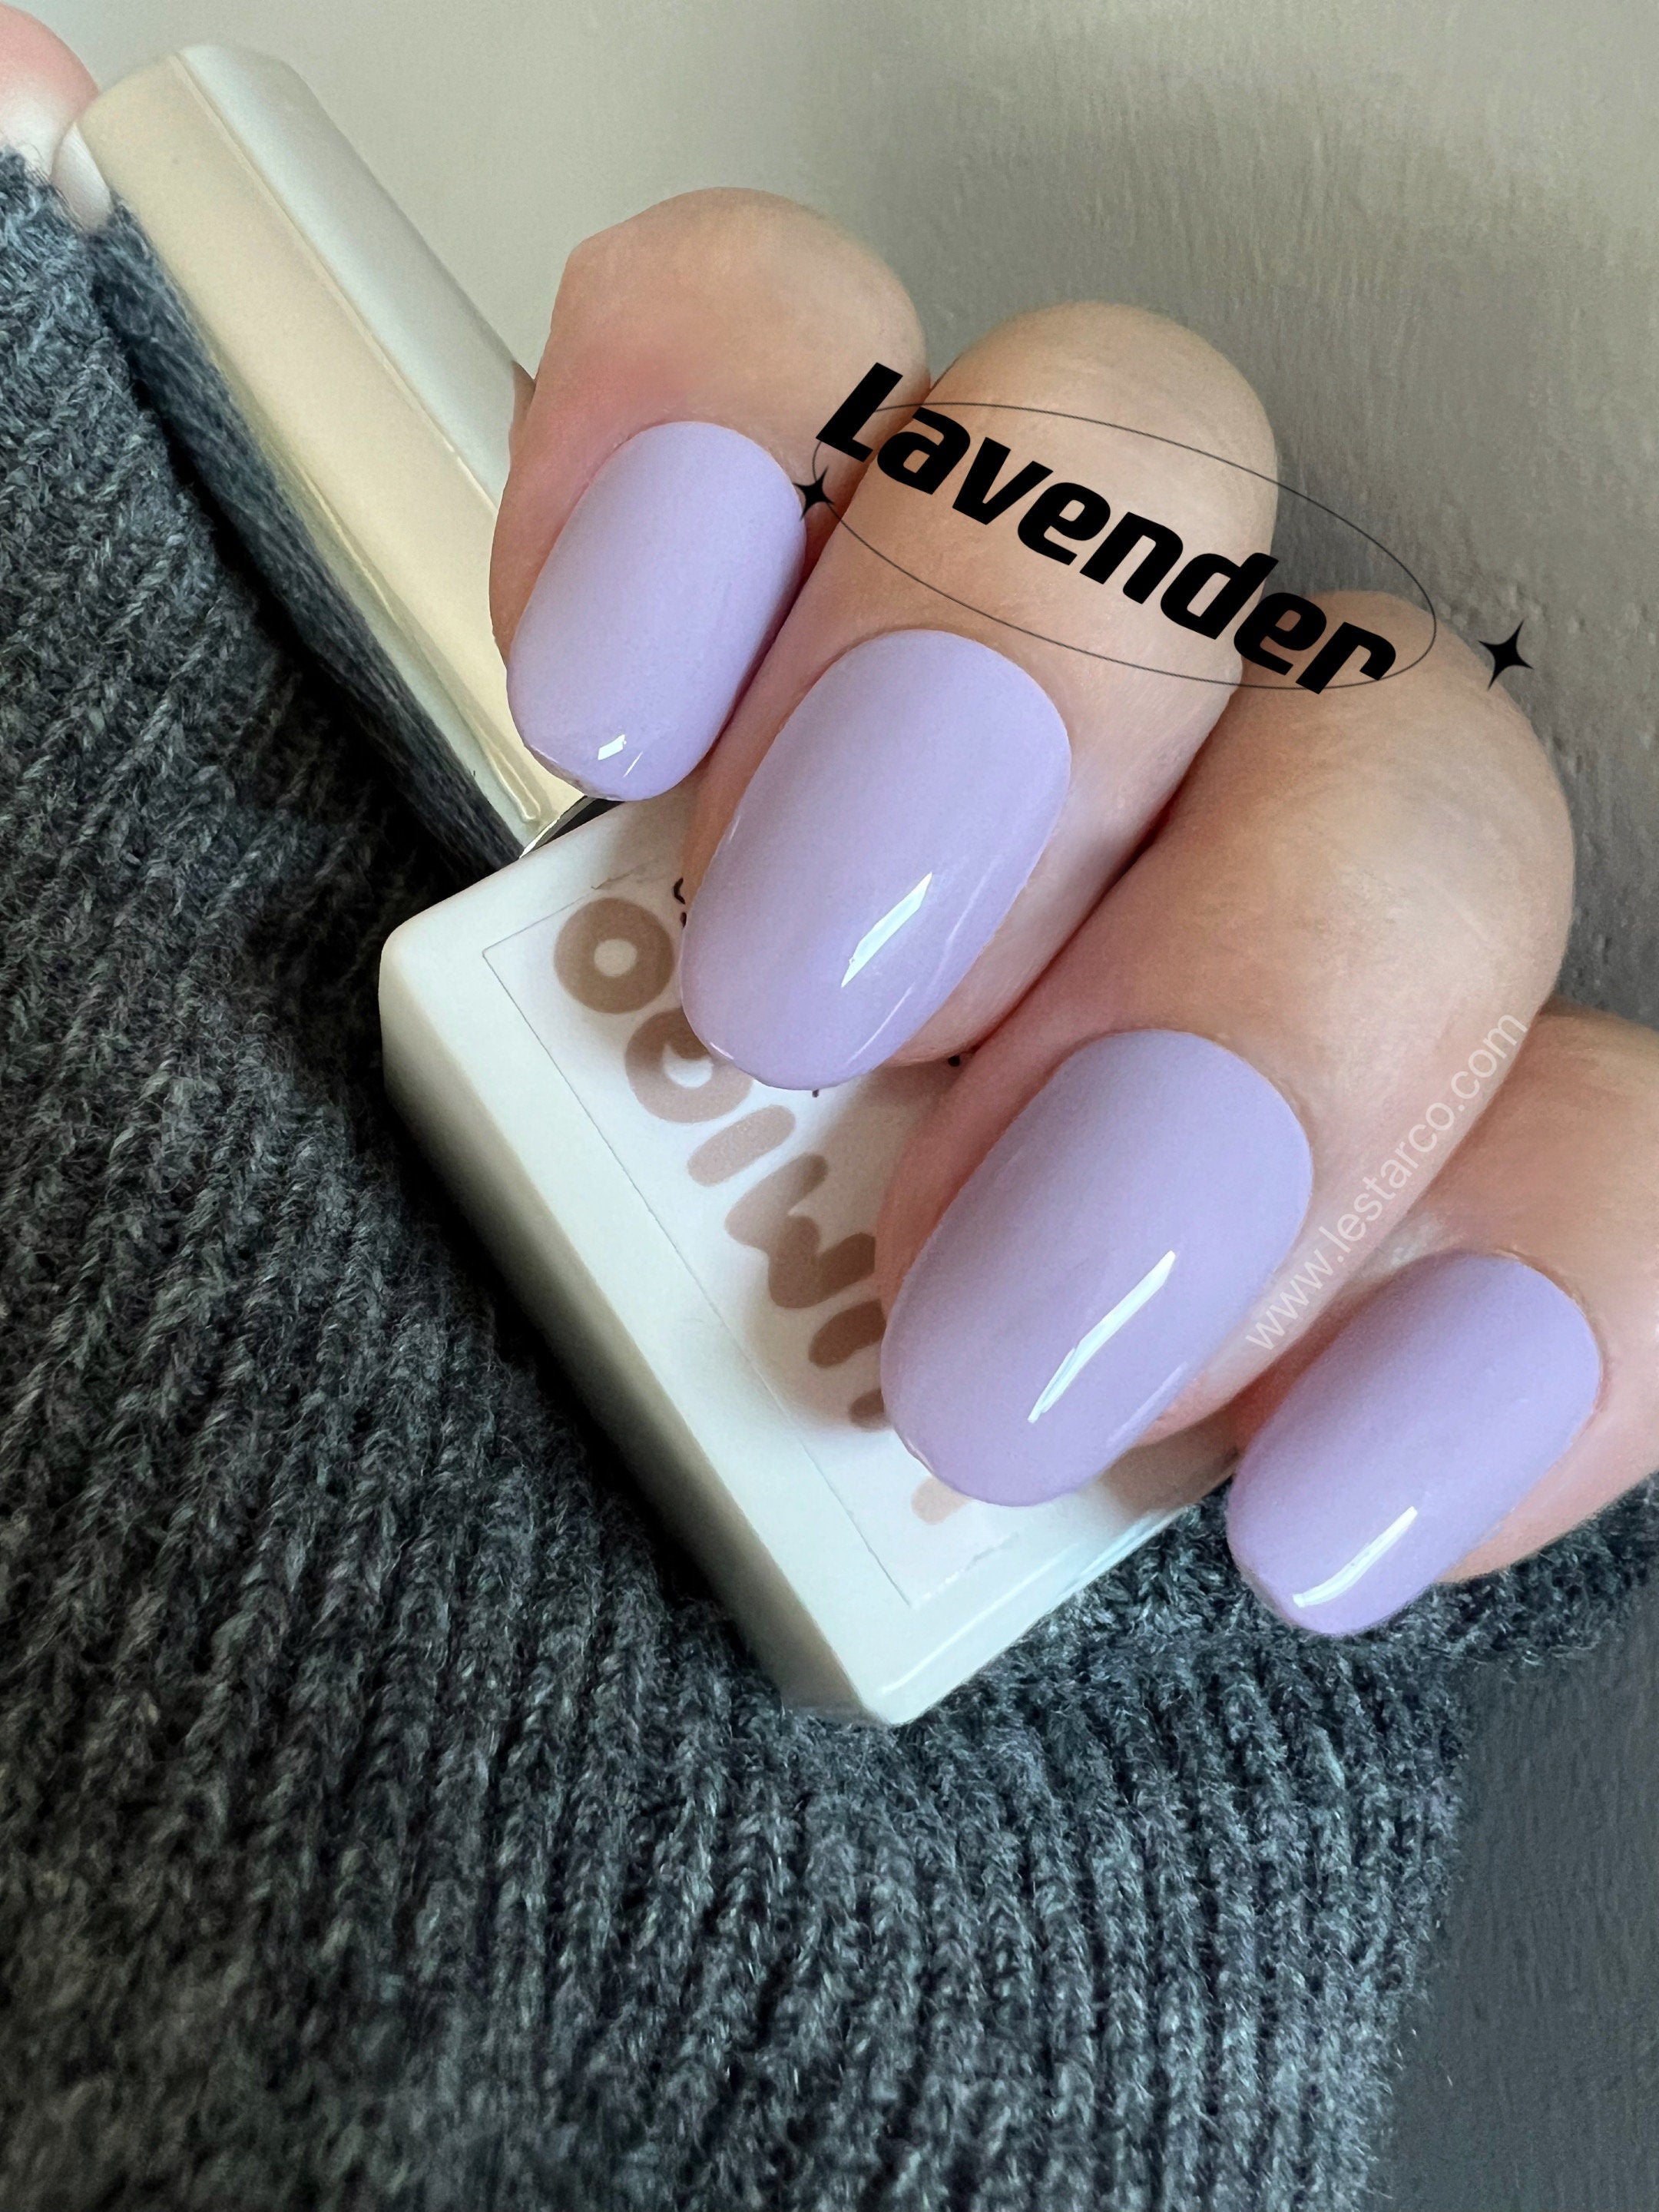 LAVENDER NAILS In PASTEL PURPLE Using Nail Art Brushes - YouTube